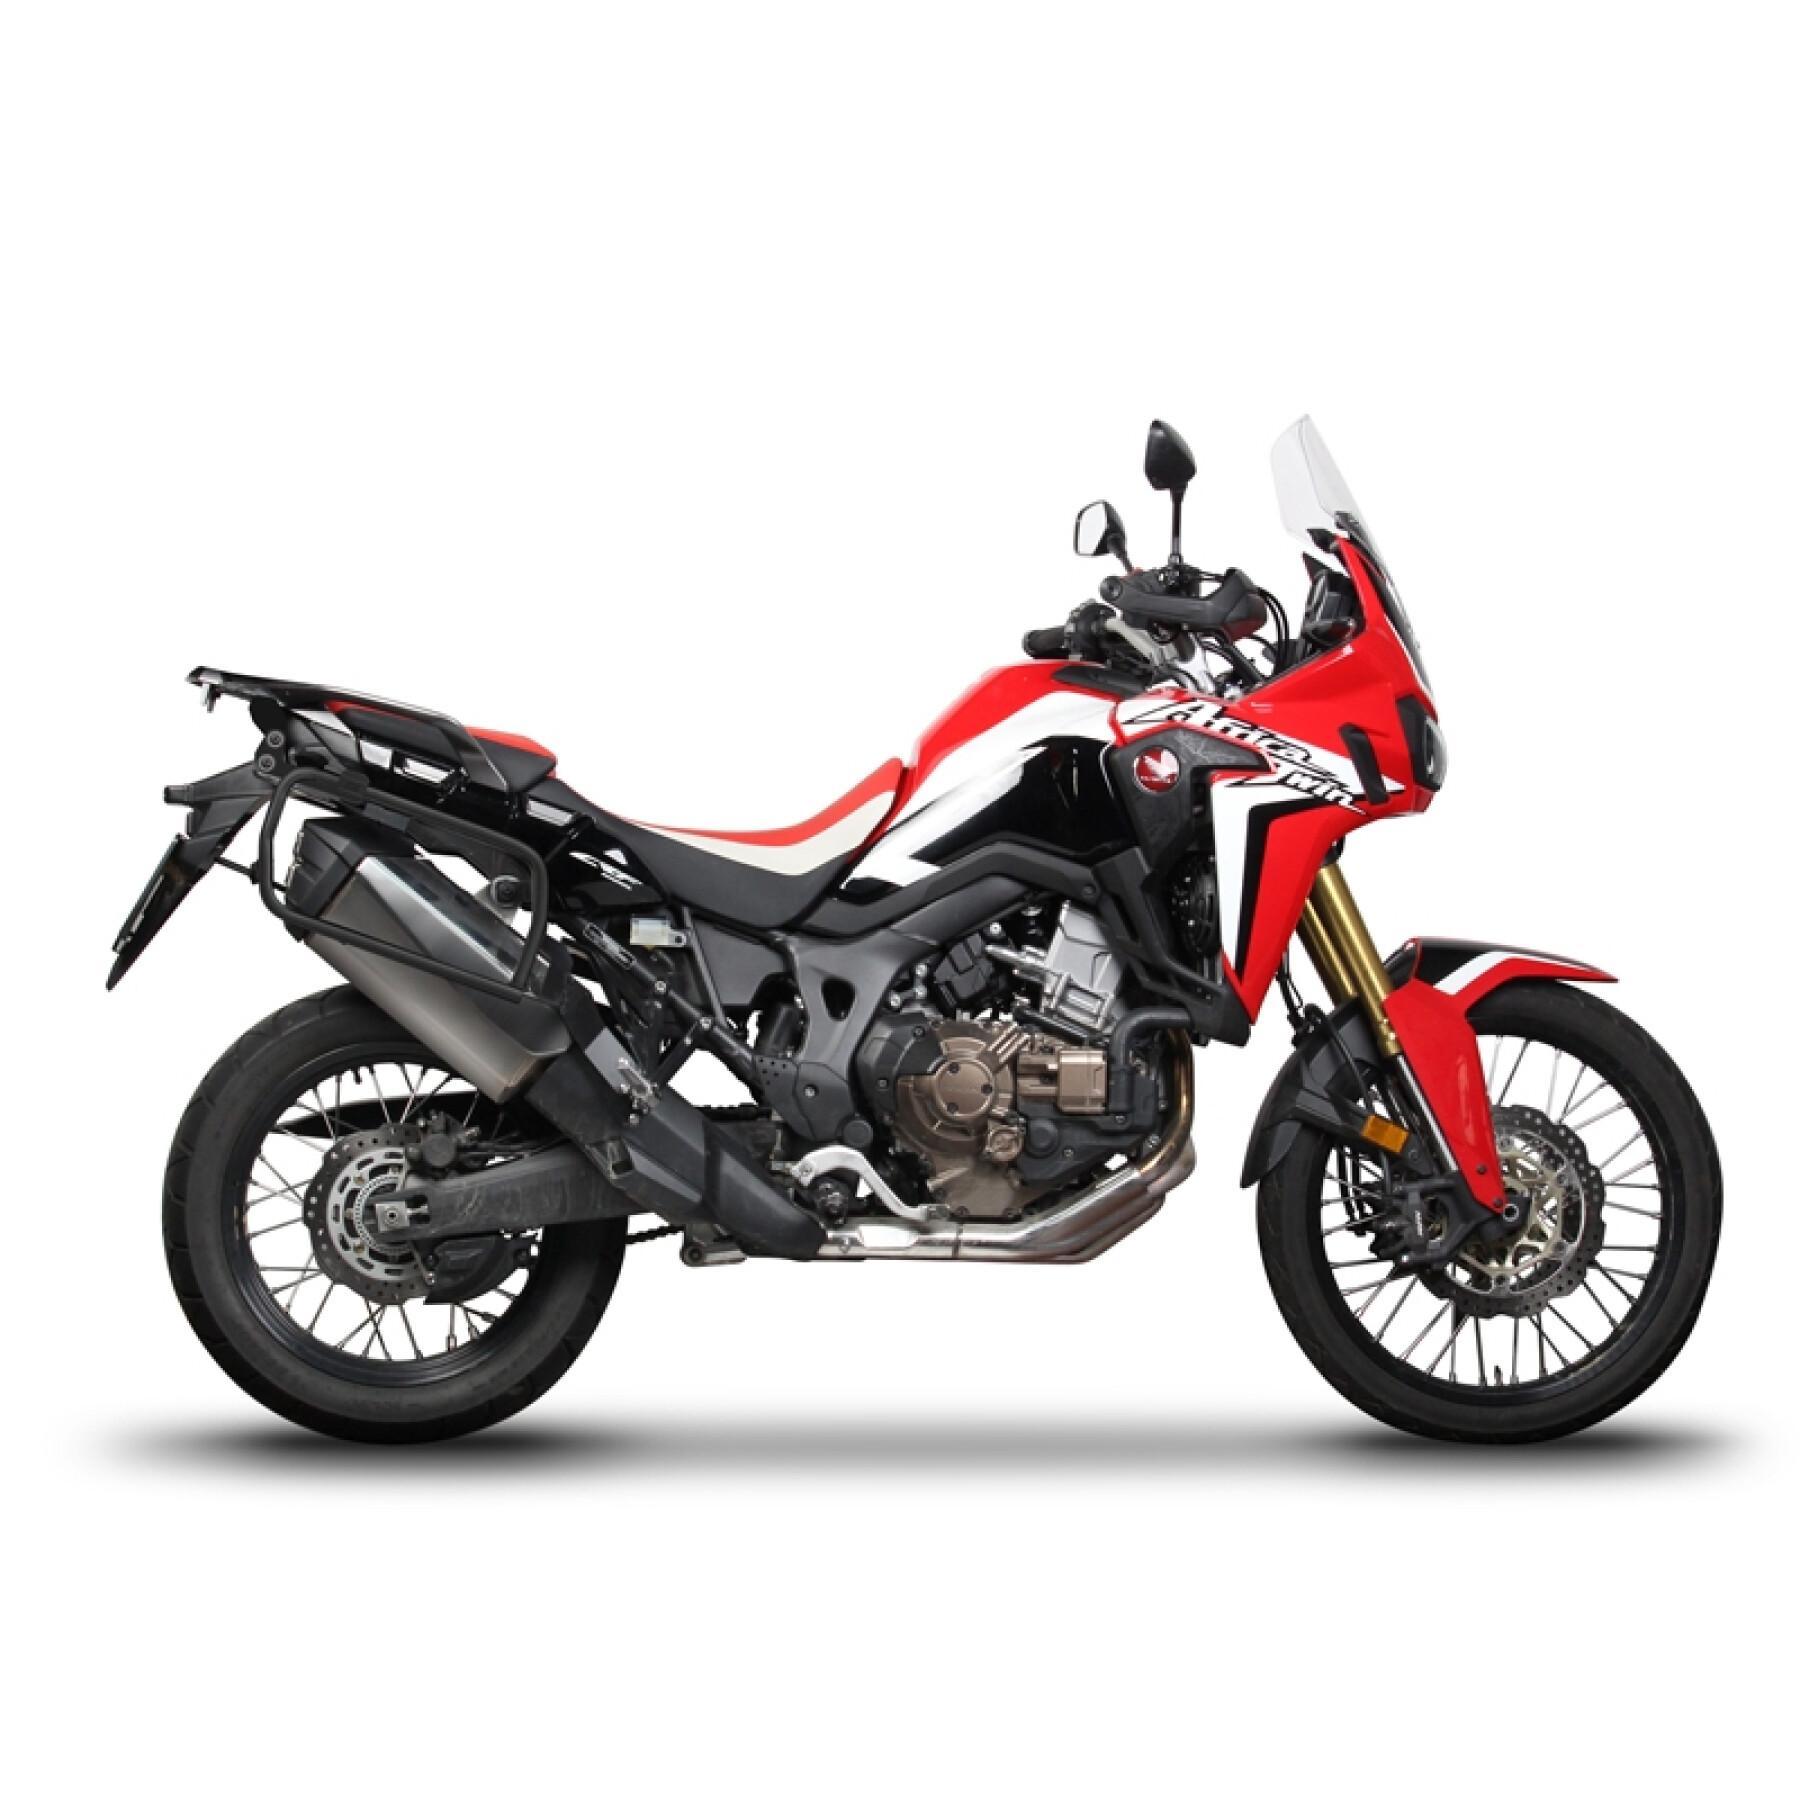 Support valises latérales moto Shad 4P System Honda Crf 1000L Africa Twin 2018-2019